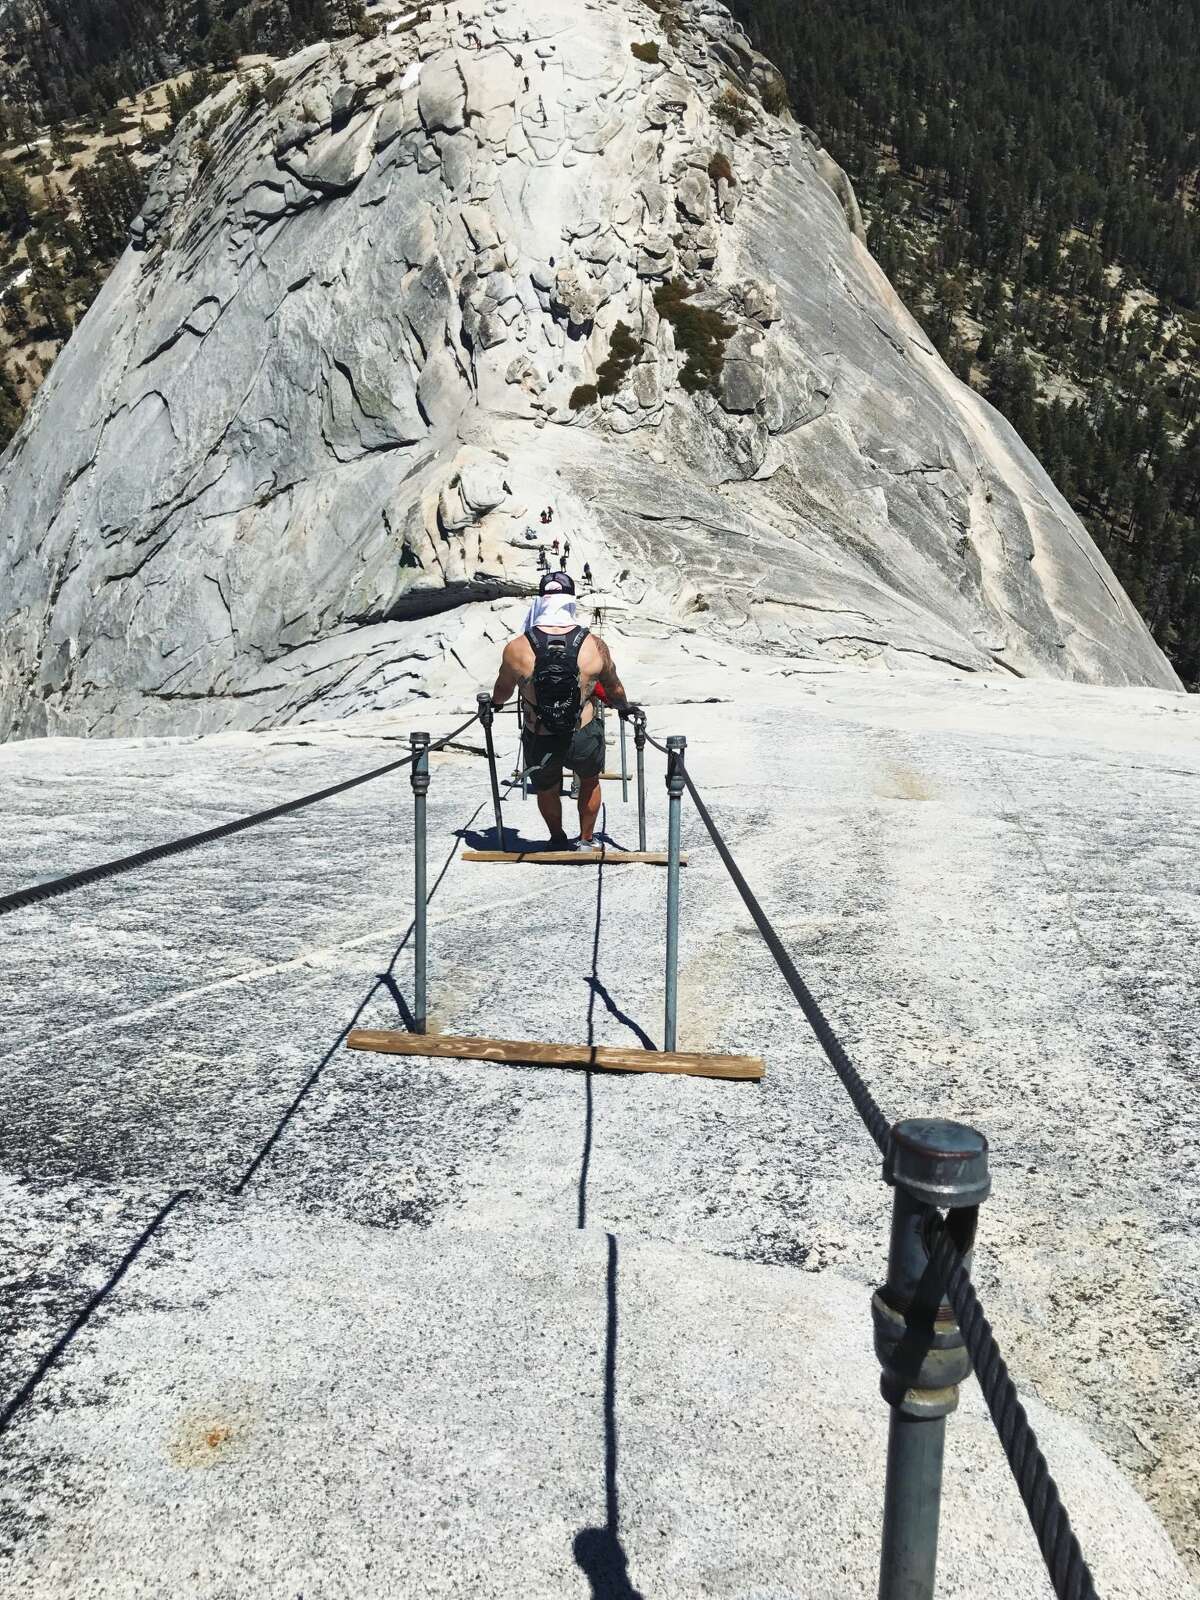 Hikers scale Half Dome via the cables on Sunday, June 4, 2017.